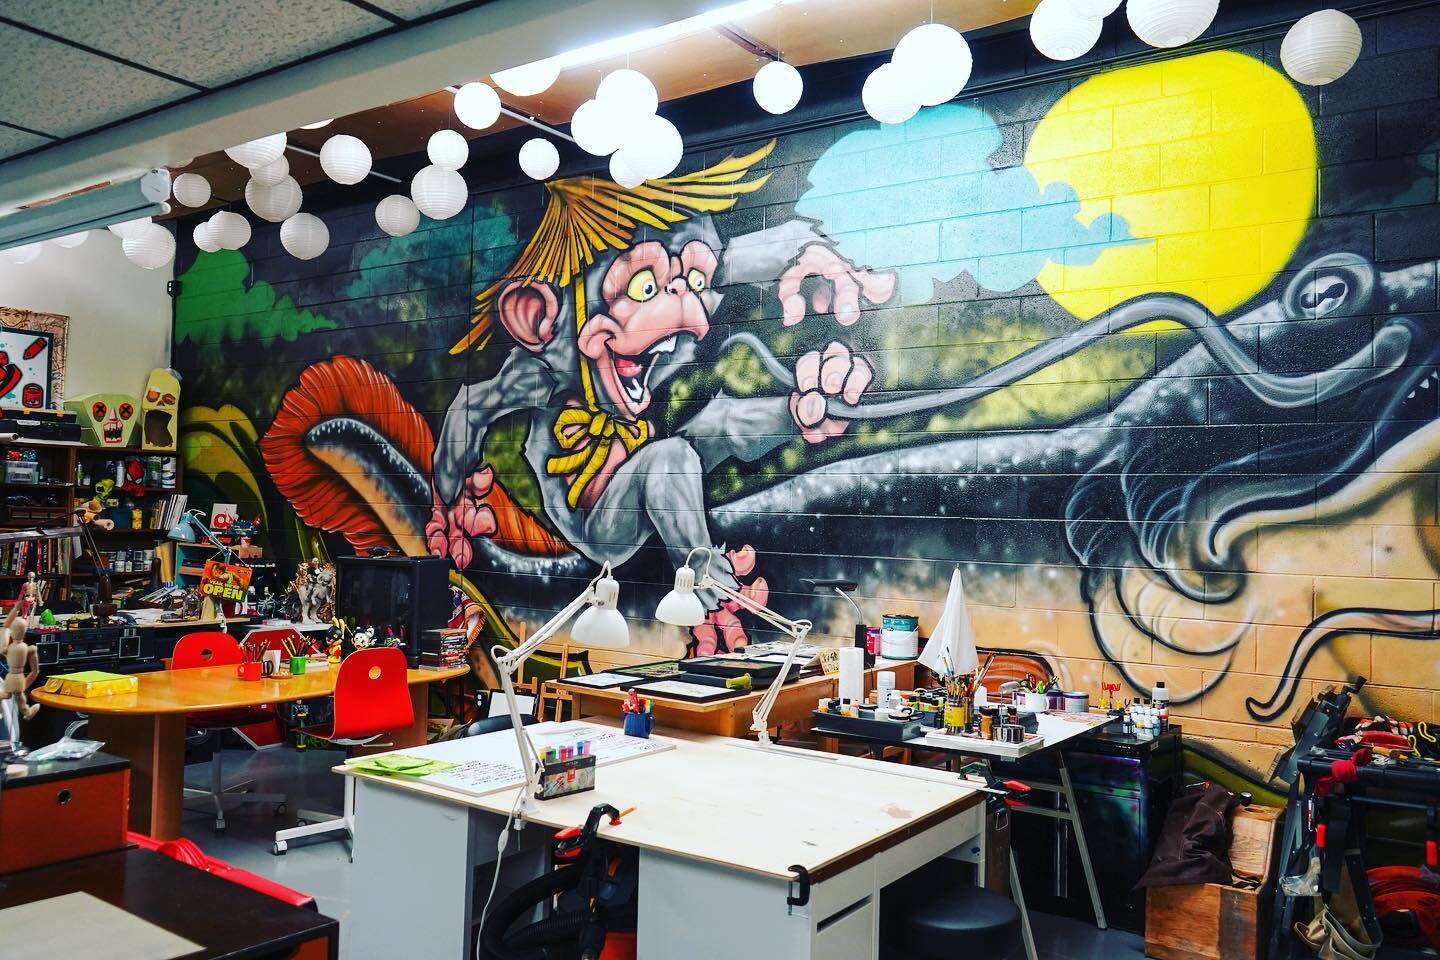 Hey there ink lovers! Let's give a shoutout to one of the coolest creative businesses around - @creaturearcade! Not only do they specialize in awesome tattoos, but they also have a space dedicated to illustrations. And trust us, the creativity in thi